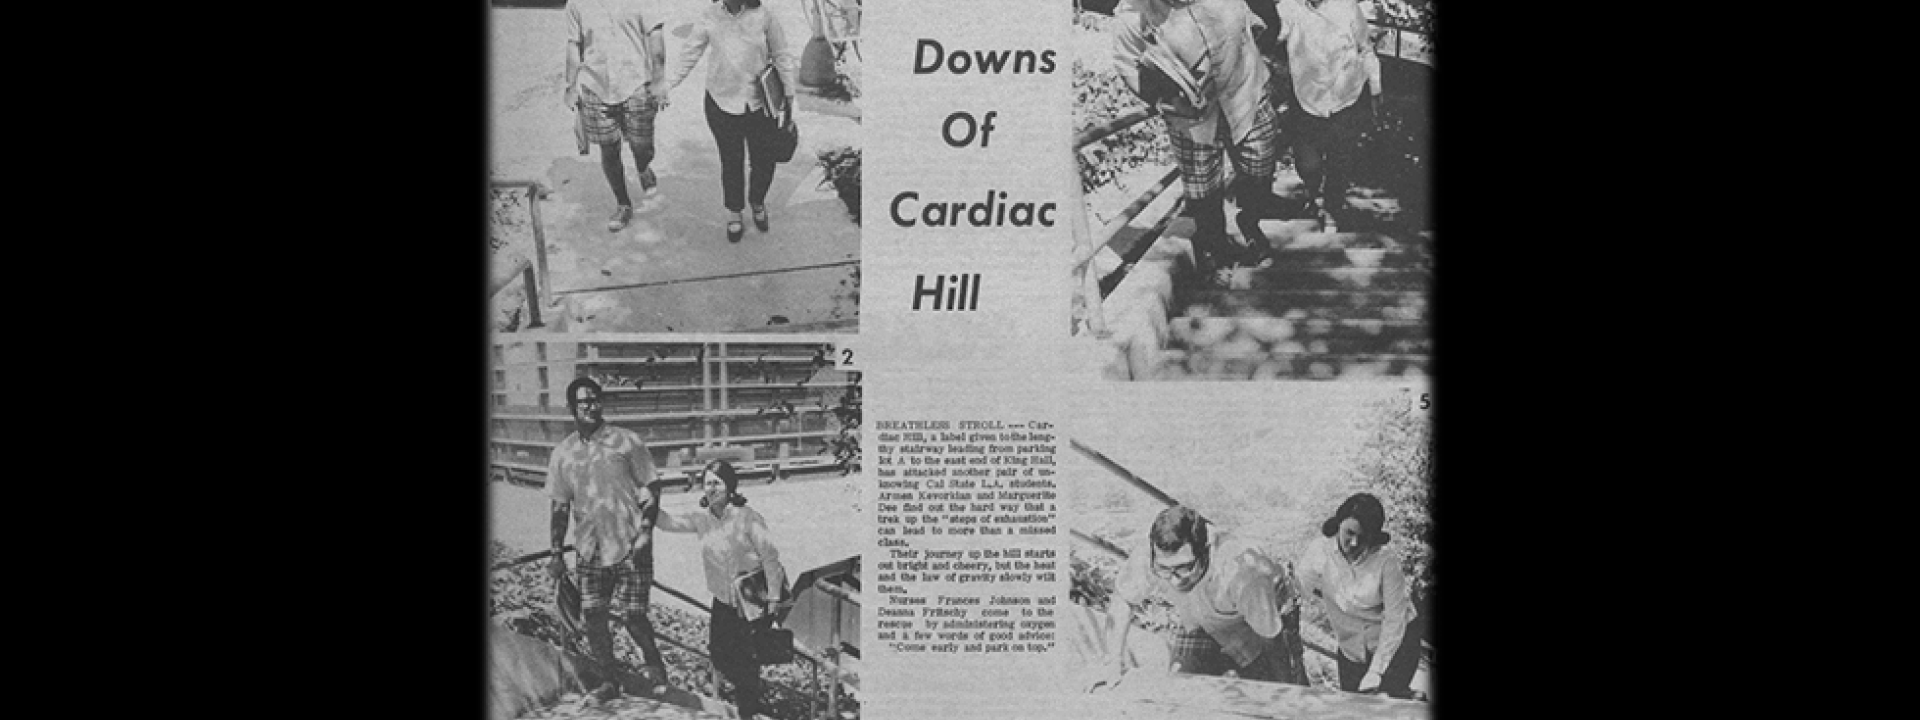 Newspaper clipping of Cal State LA cardiac hill featuring students walking up stairs